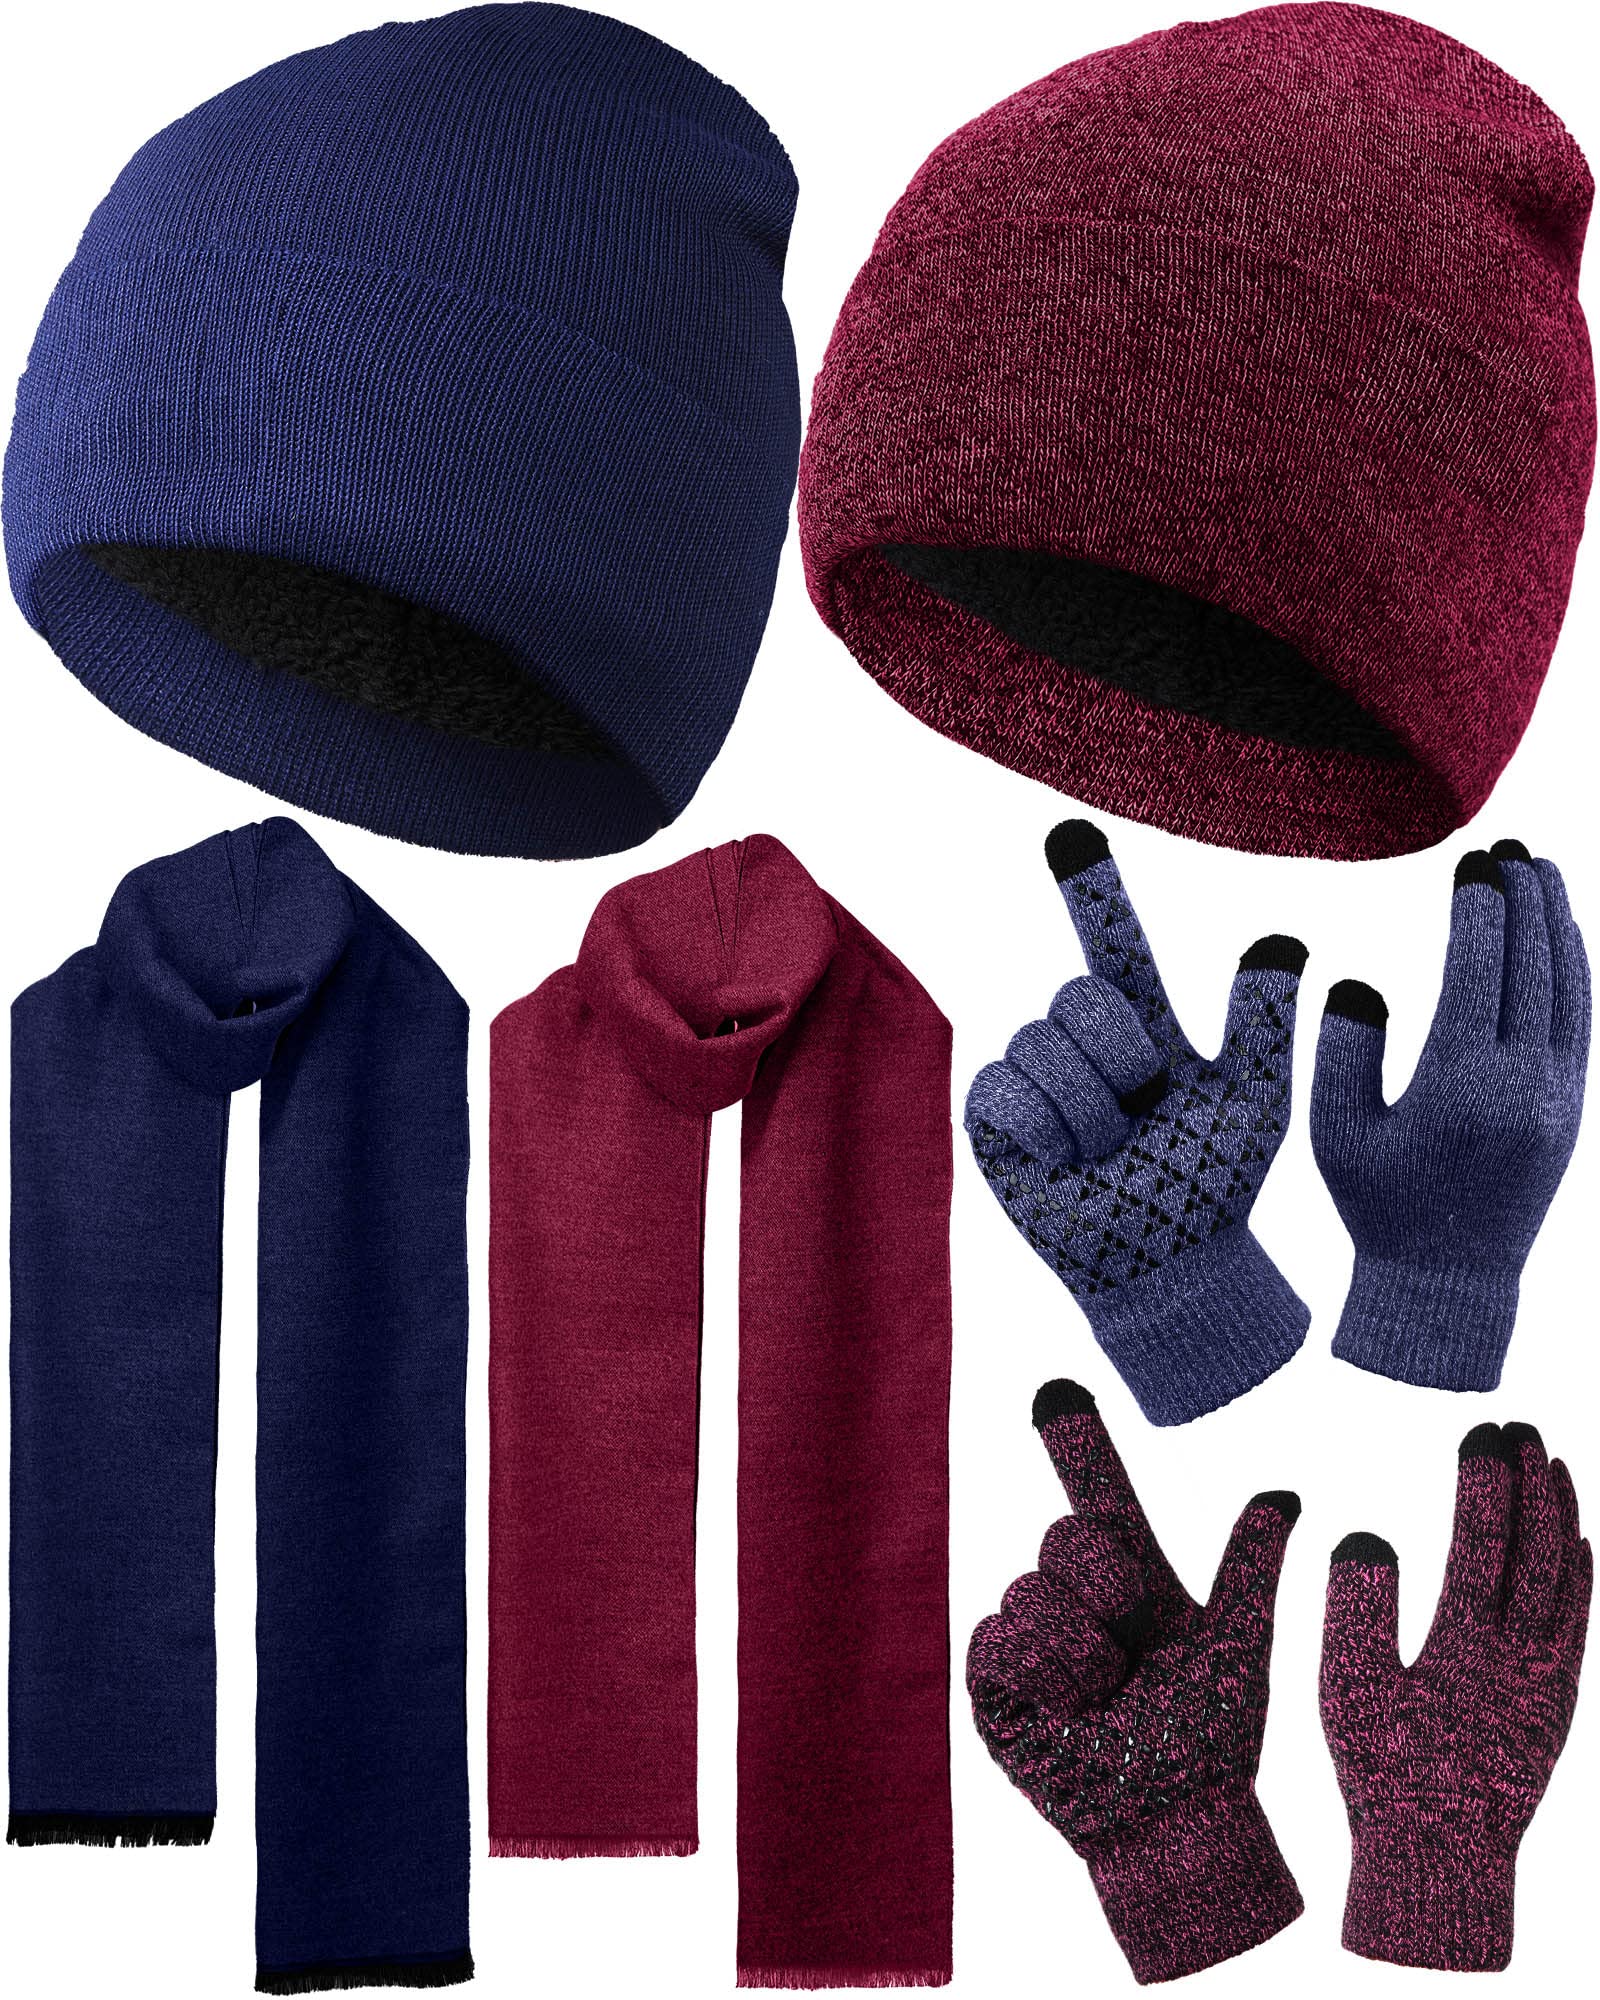 SATINIOR 6 Pieces Winter Warm Knit Beanie Hat Touchscreen Gloves Scarf Set Fleece Lining Skull Caps Neck Scarves, Navy Blue, Wine Red, One Size